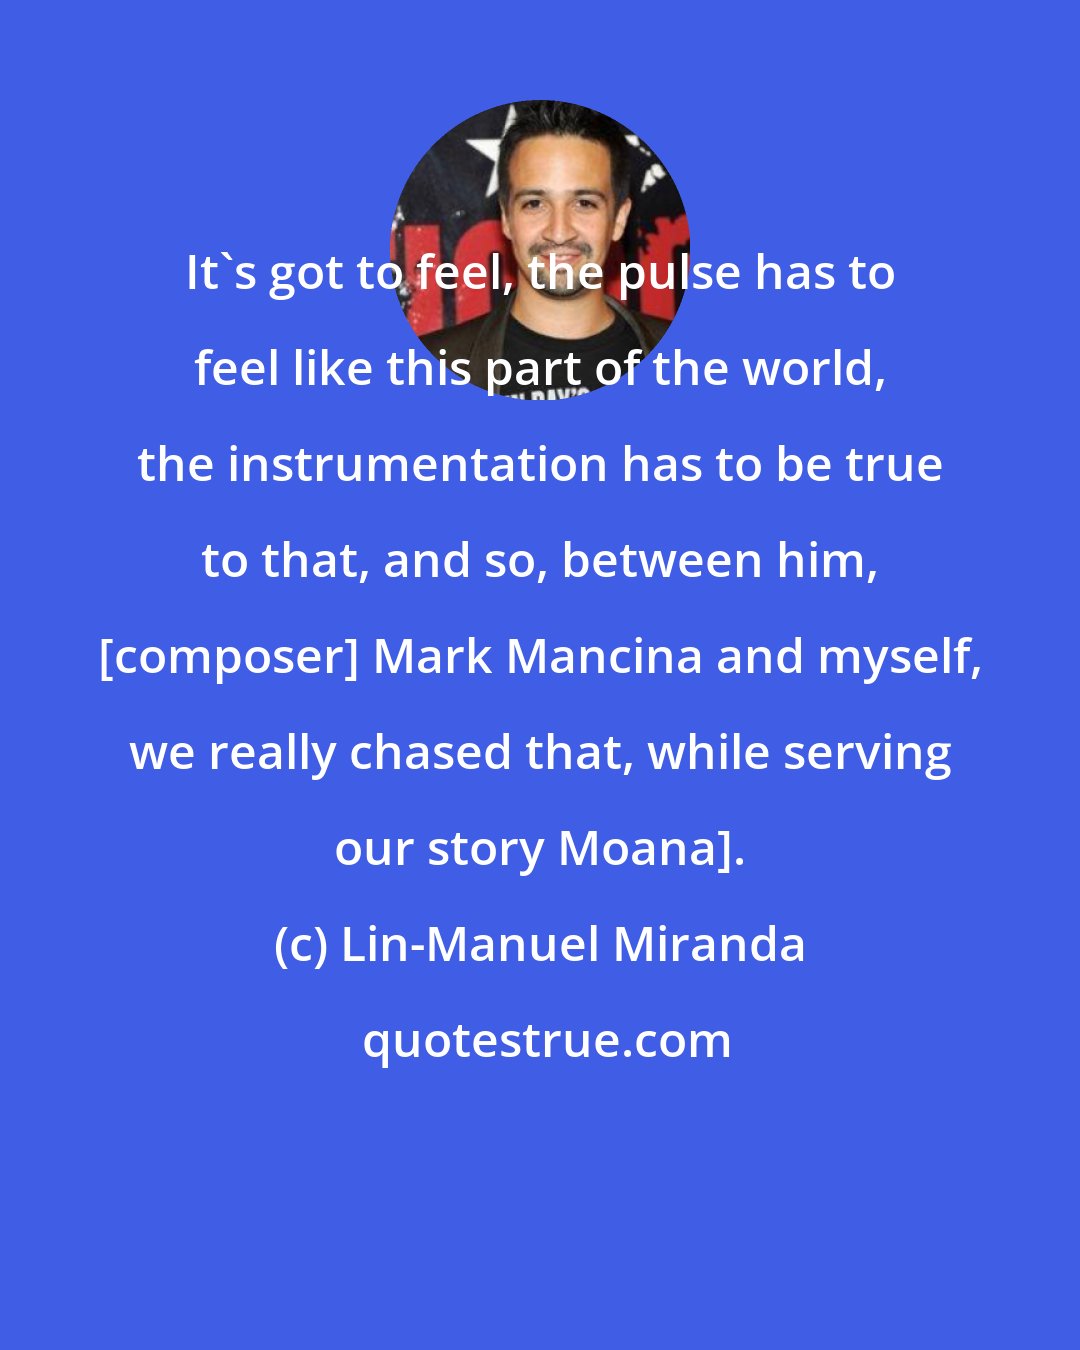 Lin-Manuel Miranda: It's got to feel, the pulse has to feel like this part of the world, the instrumentation has to be true to that, and so, between him, [composer] Mark Mancina and myself, we really chased that, while serving our story Moana].